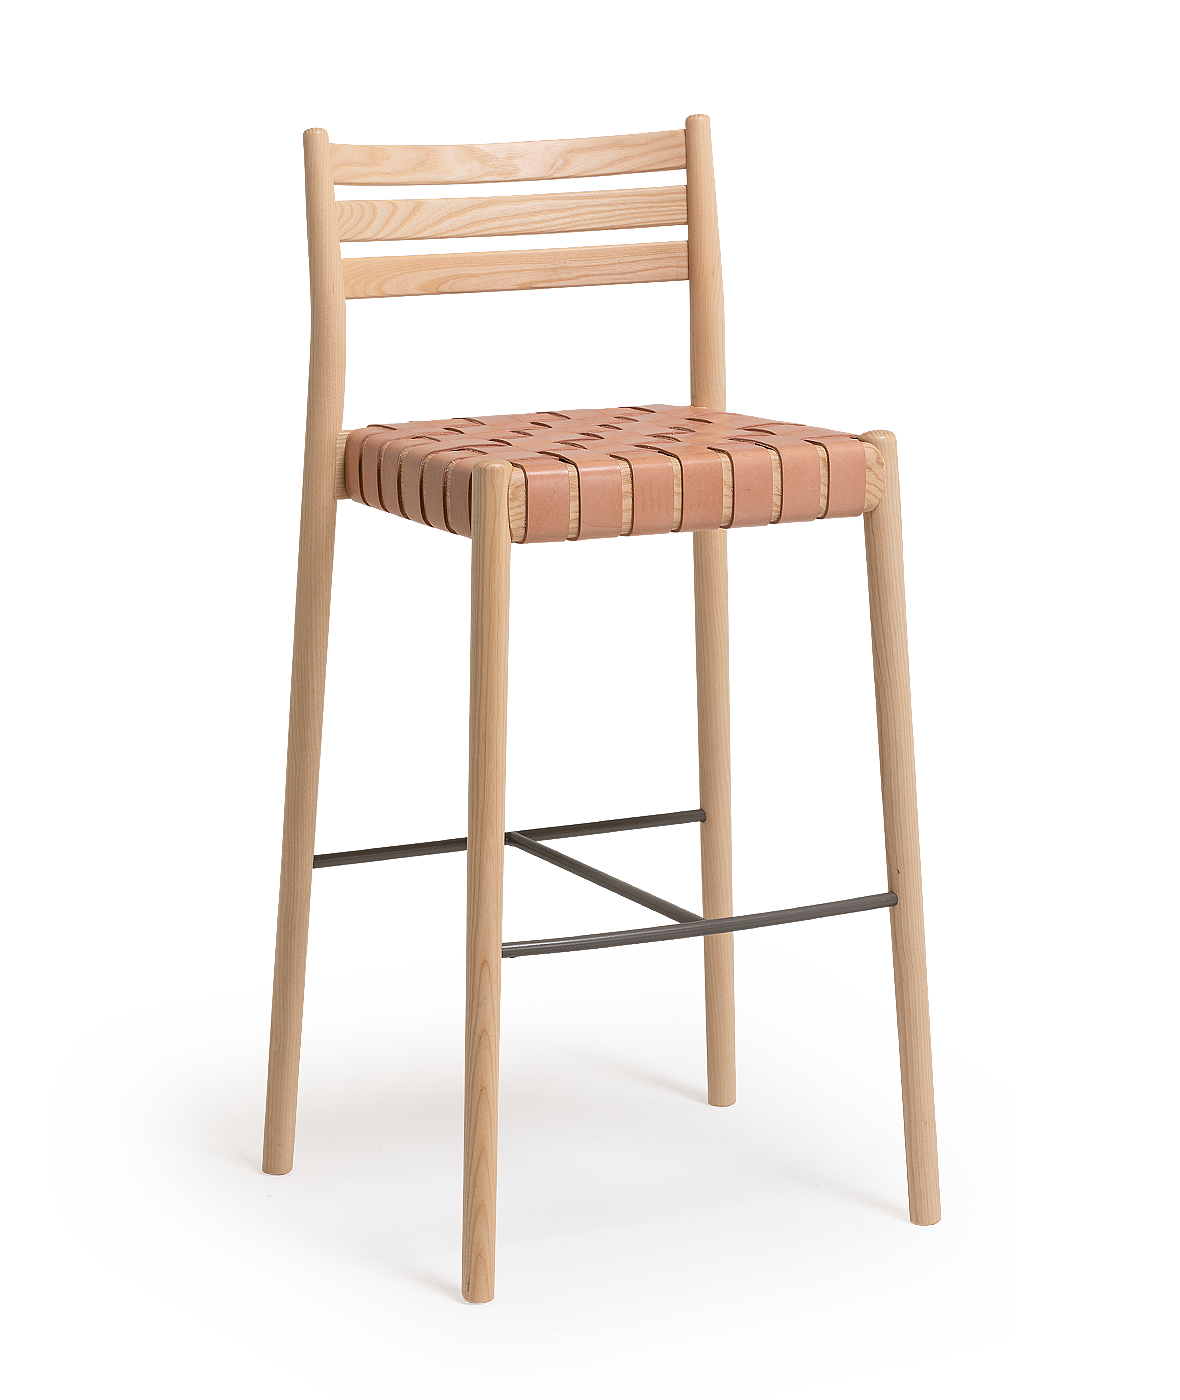 Bogart Stool with backrest and woven cord seat - Vergés